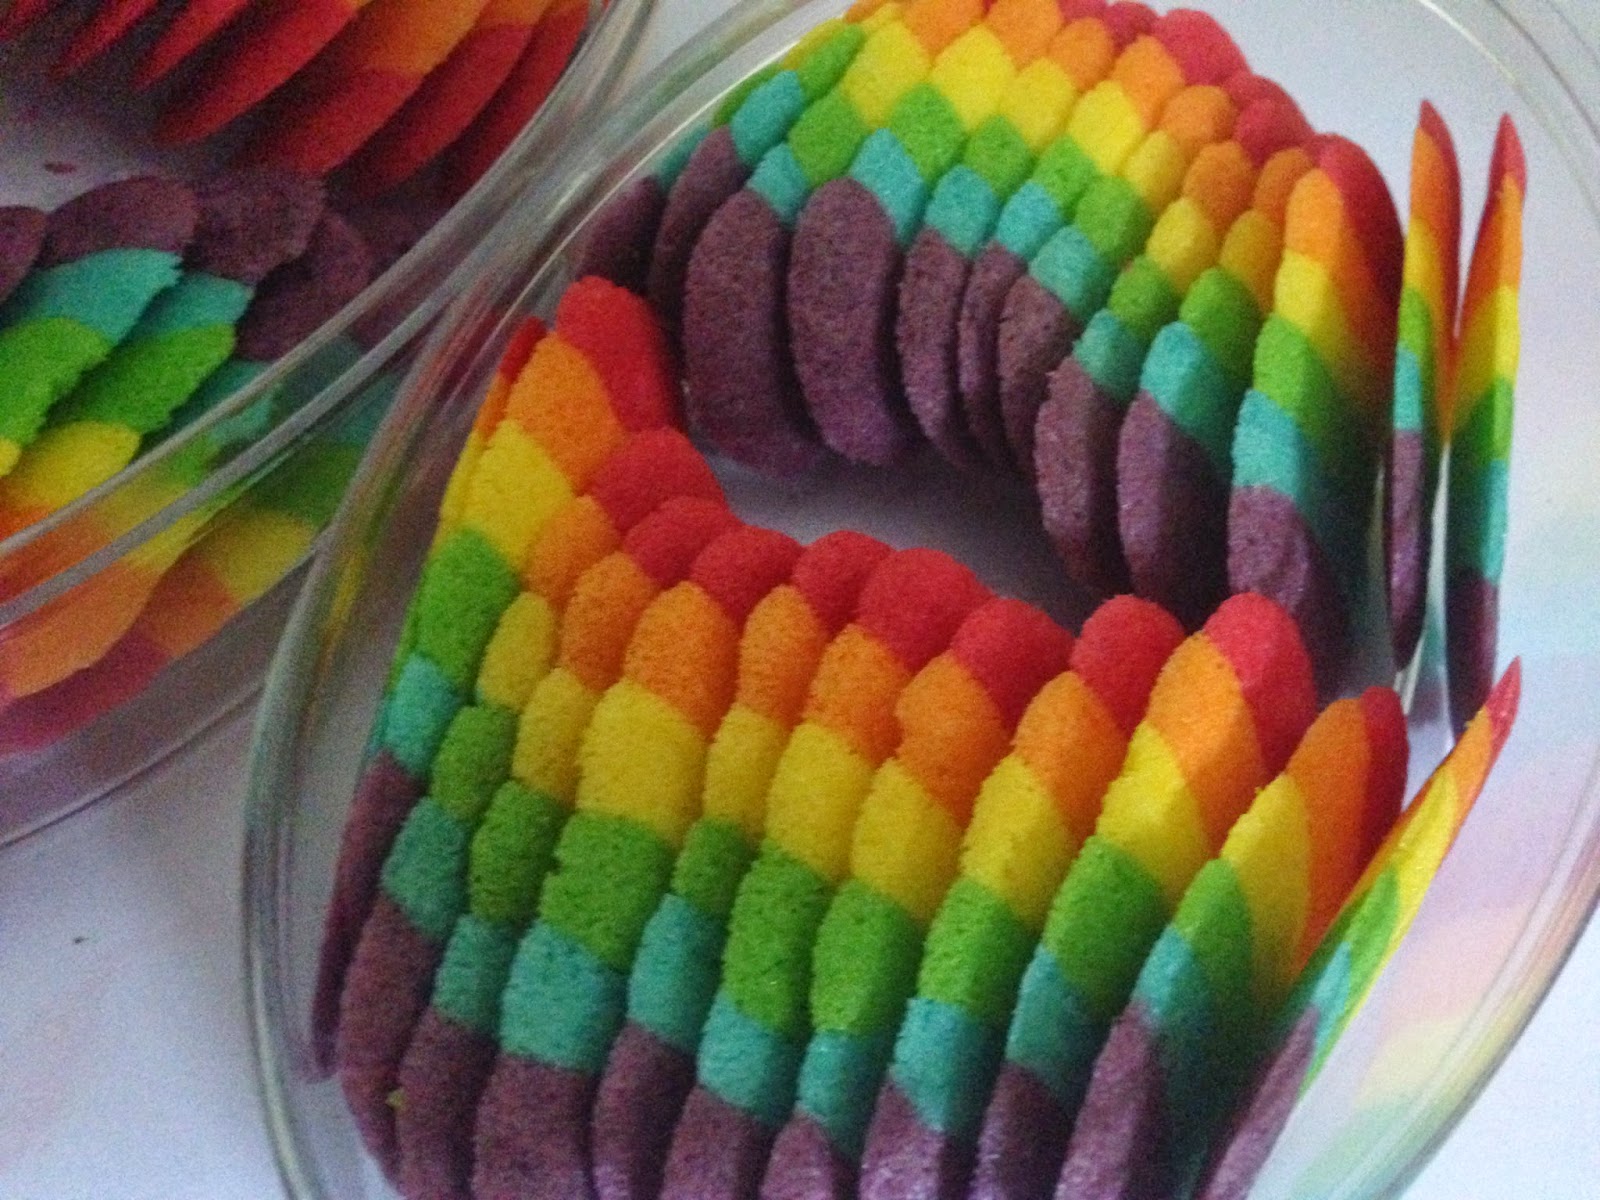 ninie cakes house: Super Delicious Rainbow Cookies @ Cat Tongue by Ninie1600 x 1200